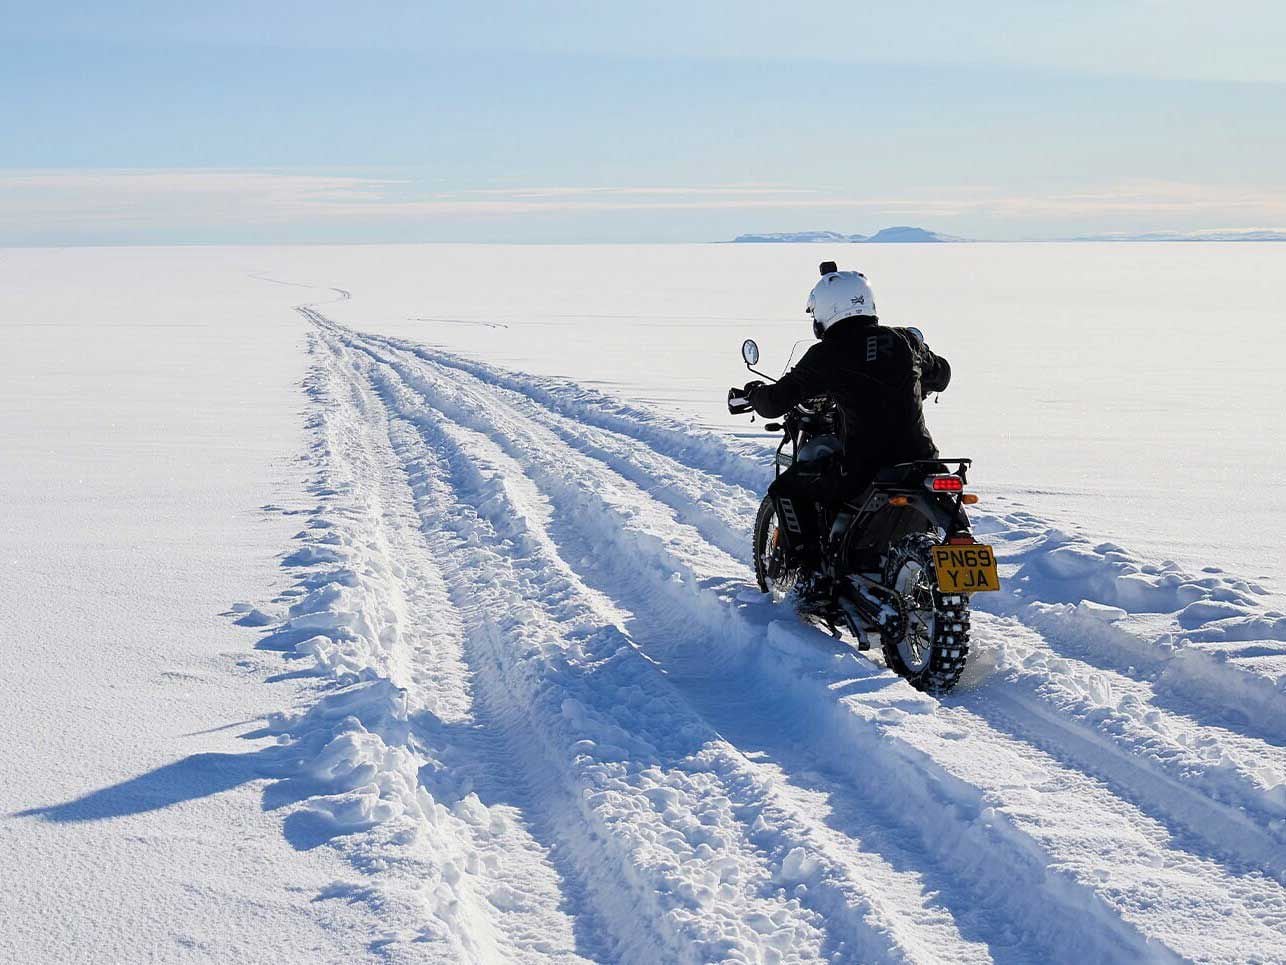 Journey to the bottom of the world? The Royal Enfield team headed south to cross Antarctica earlier this month.